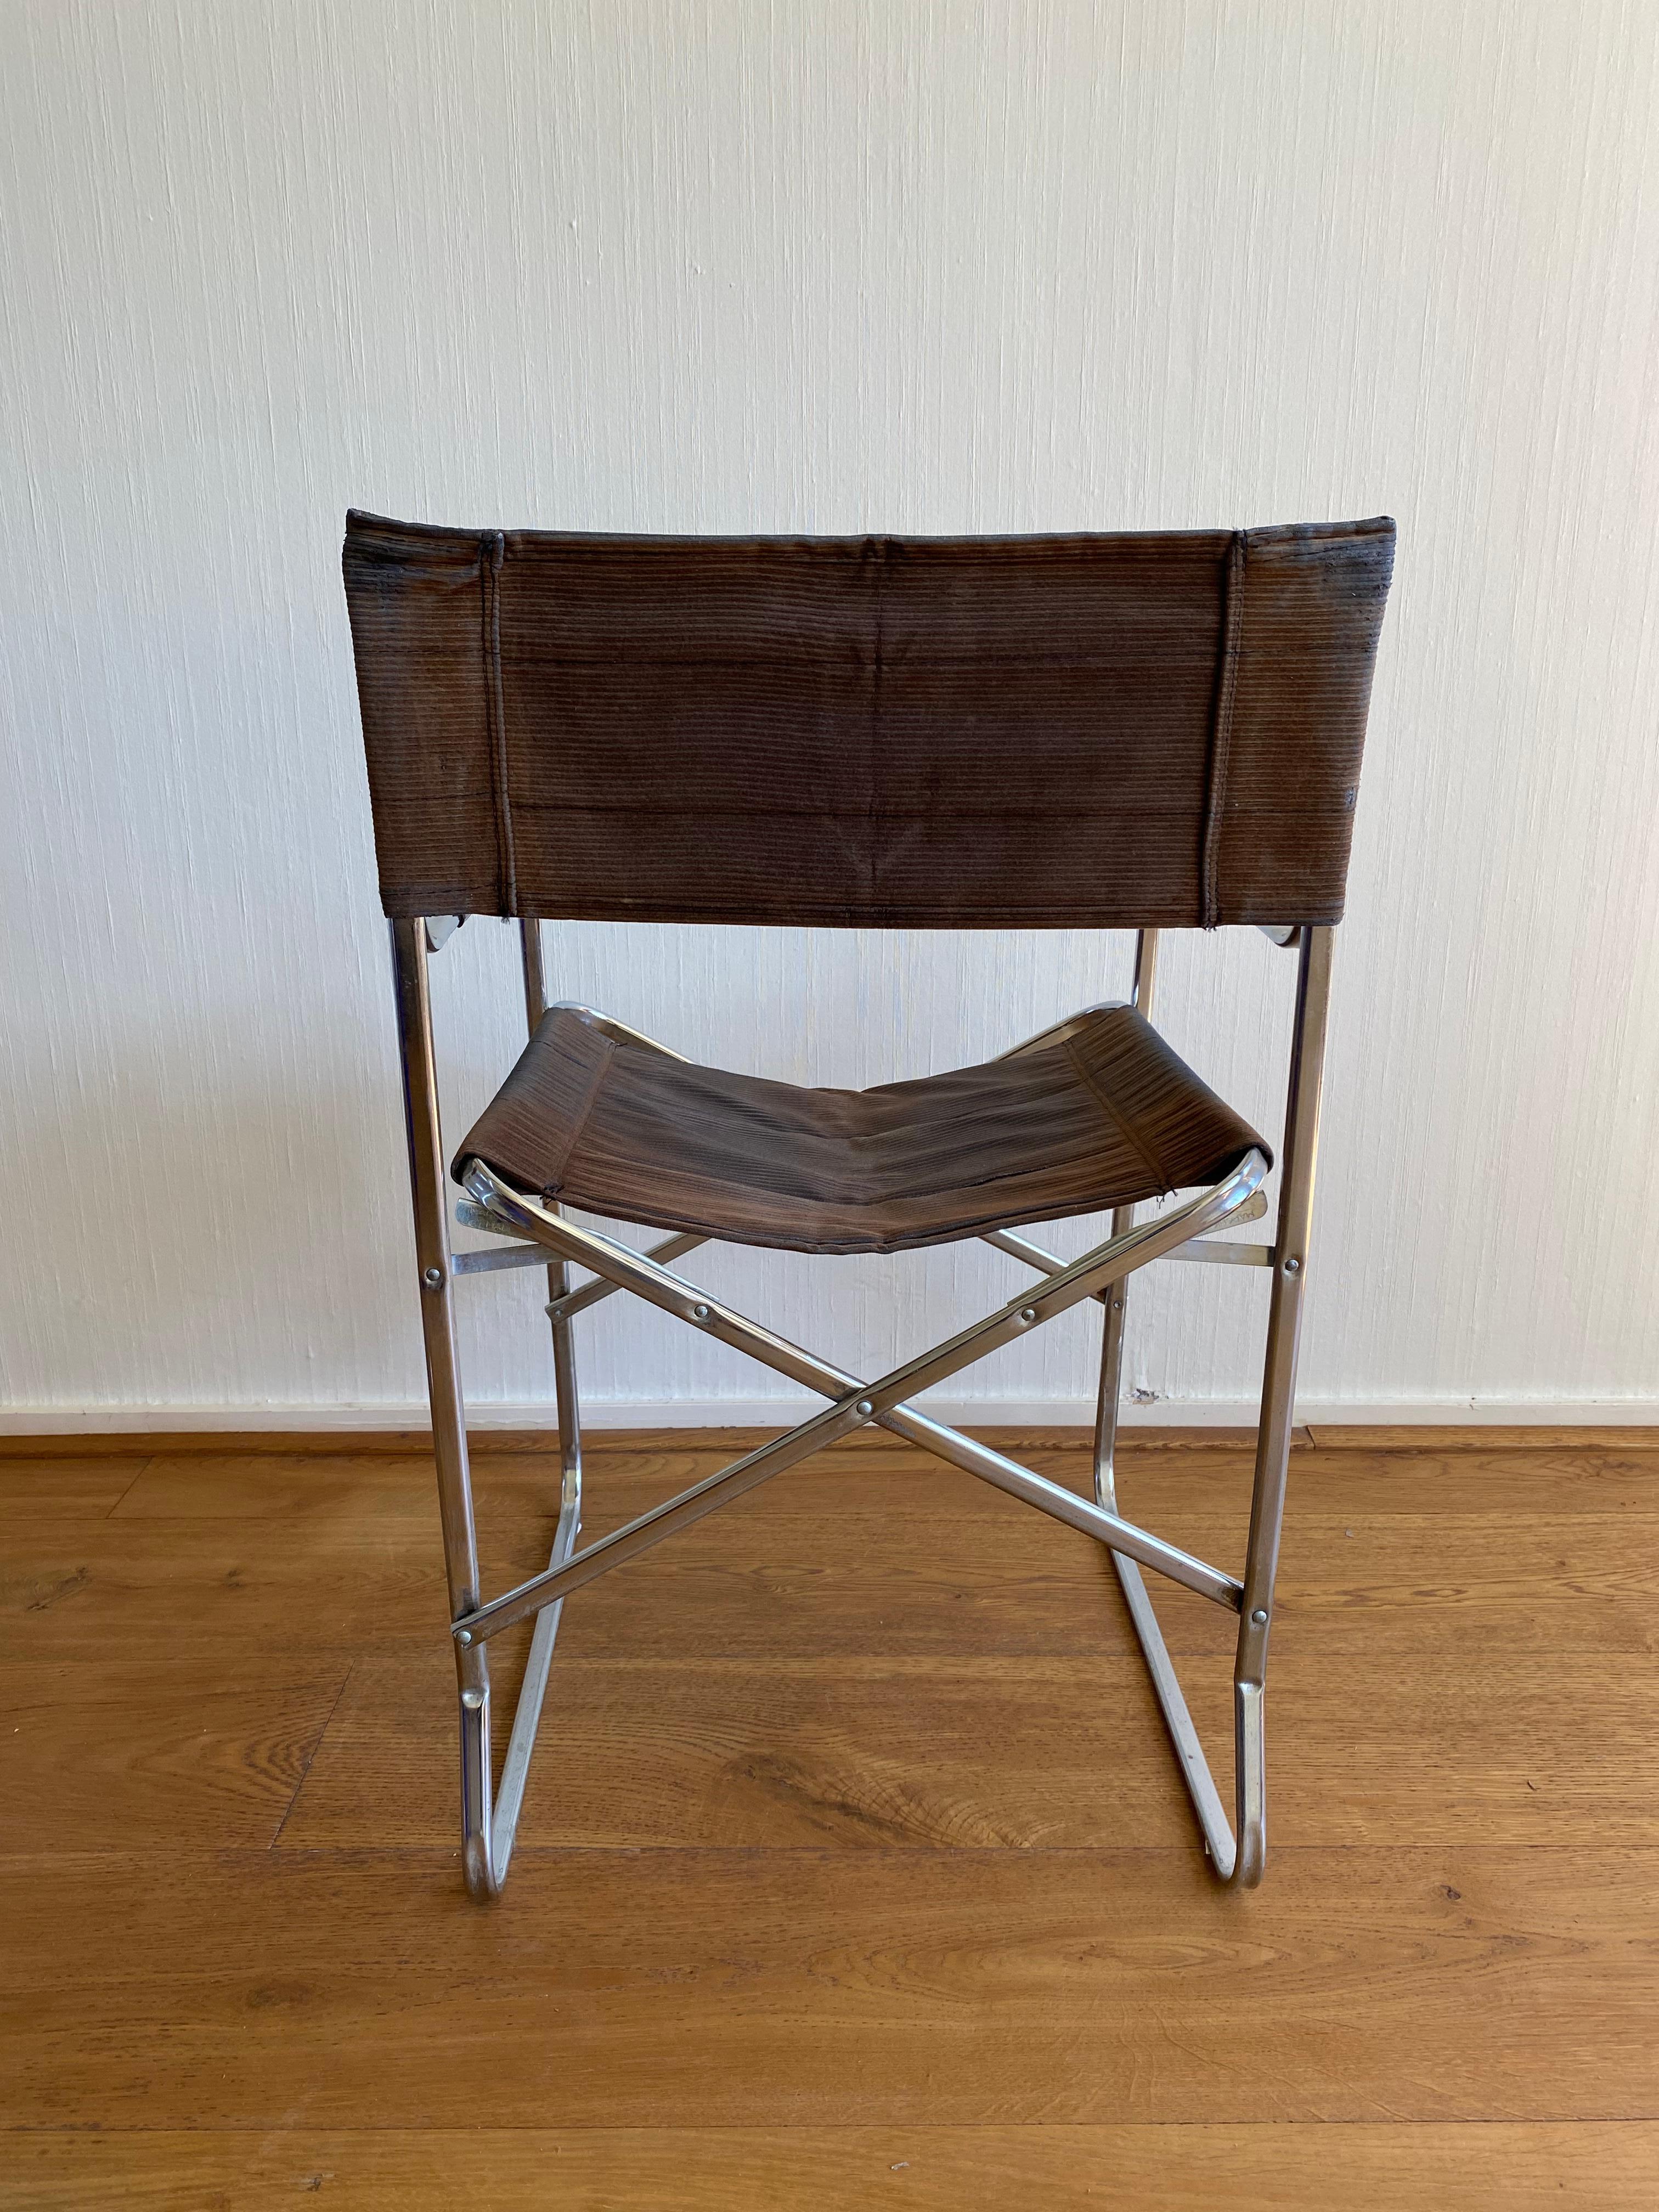 Metal Mid-Century Modern Italian Folding Chair in Style of the Gae Aulenti April Chair For Sale